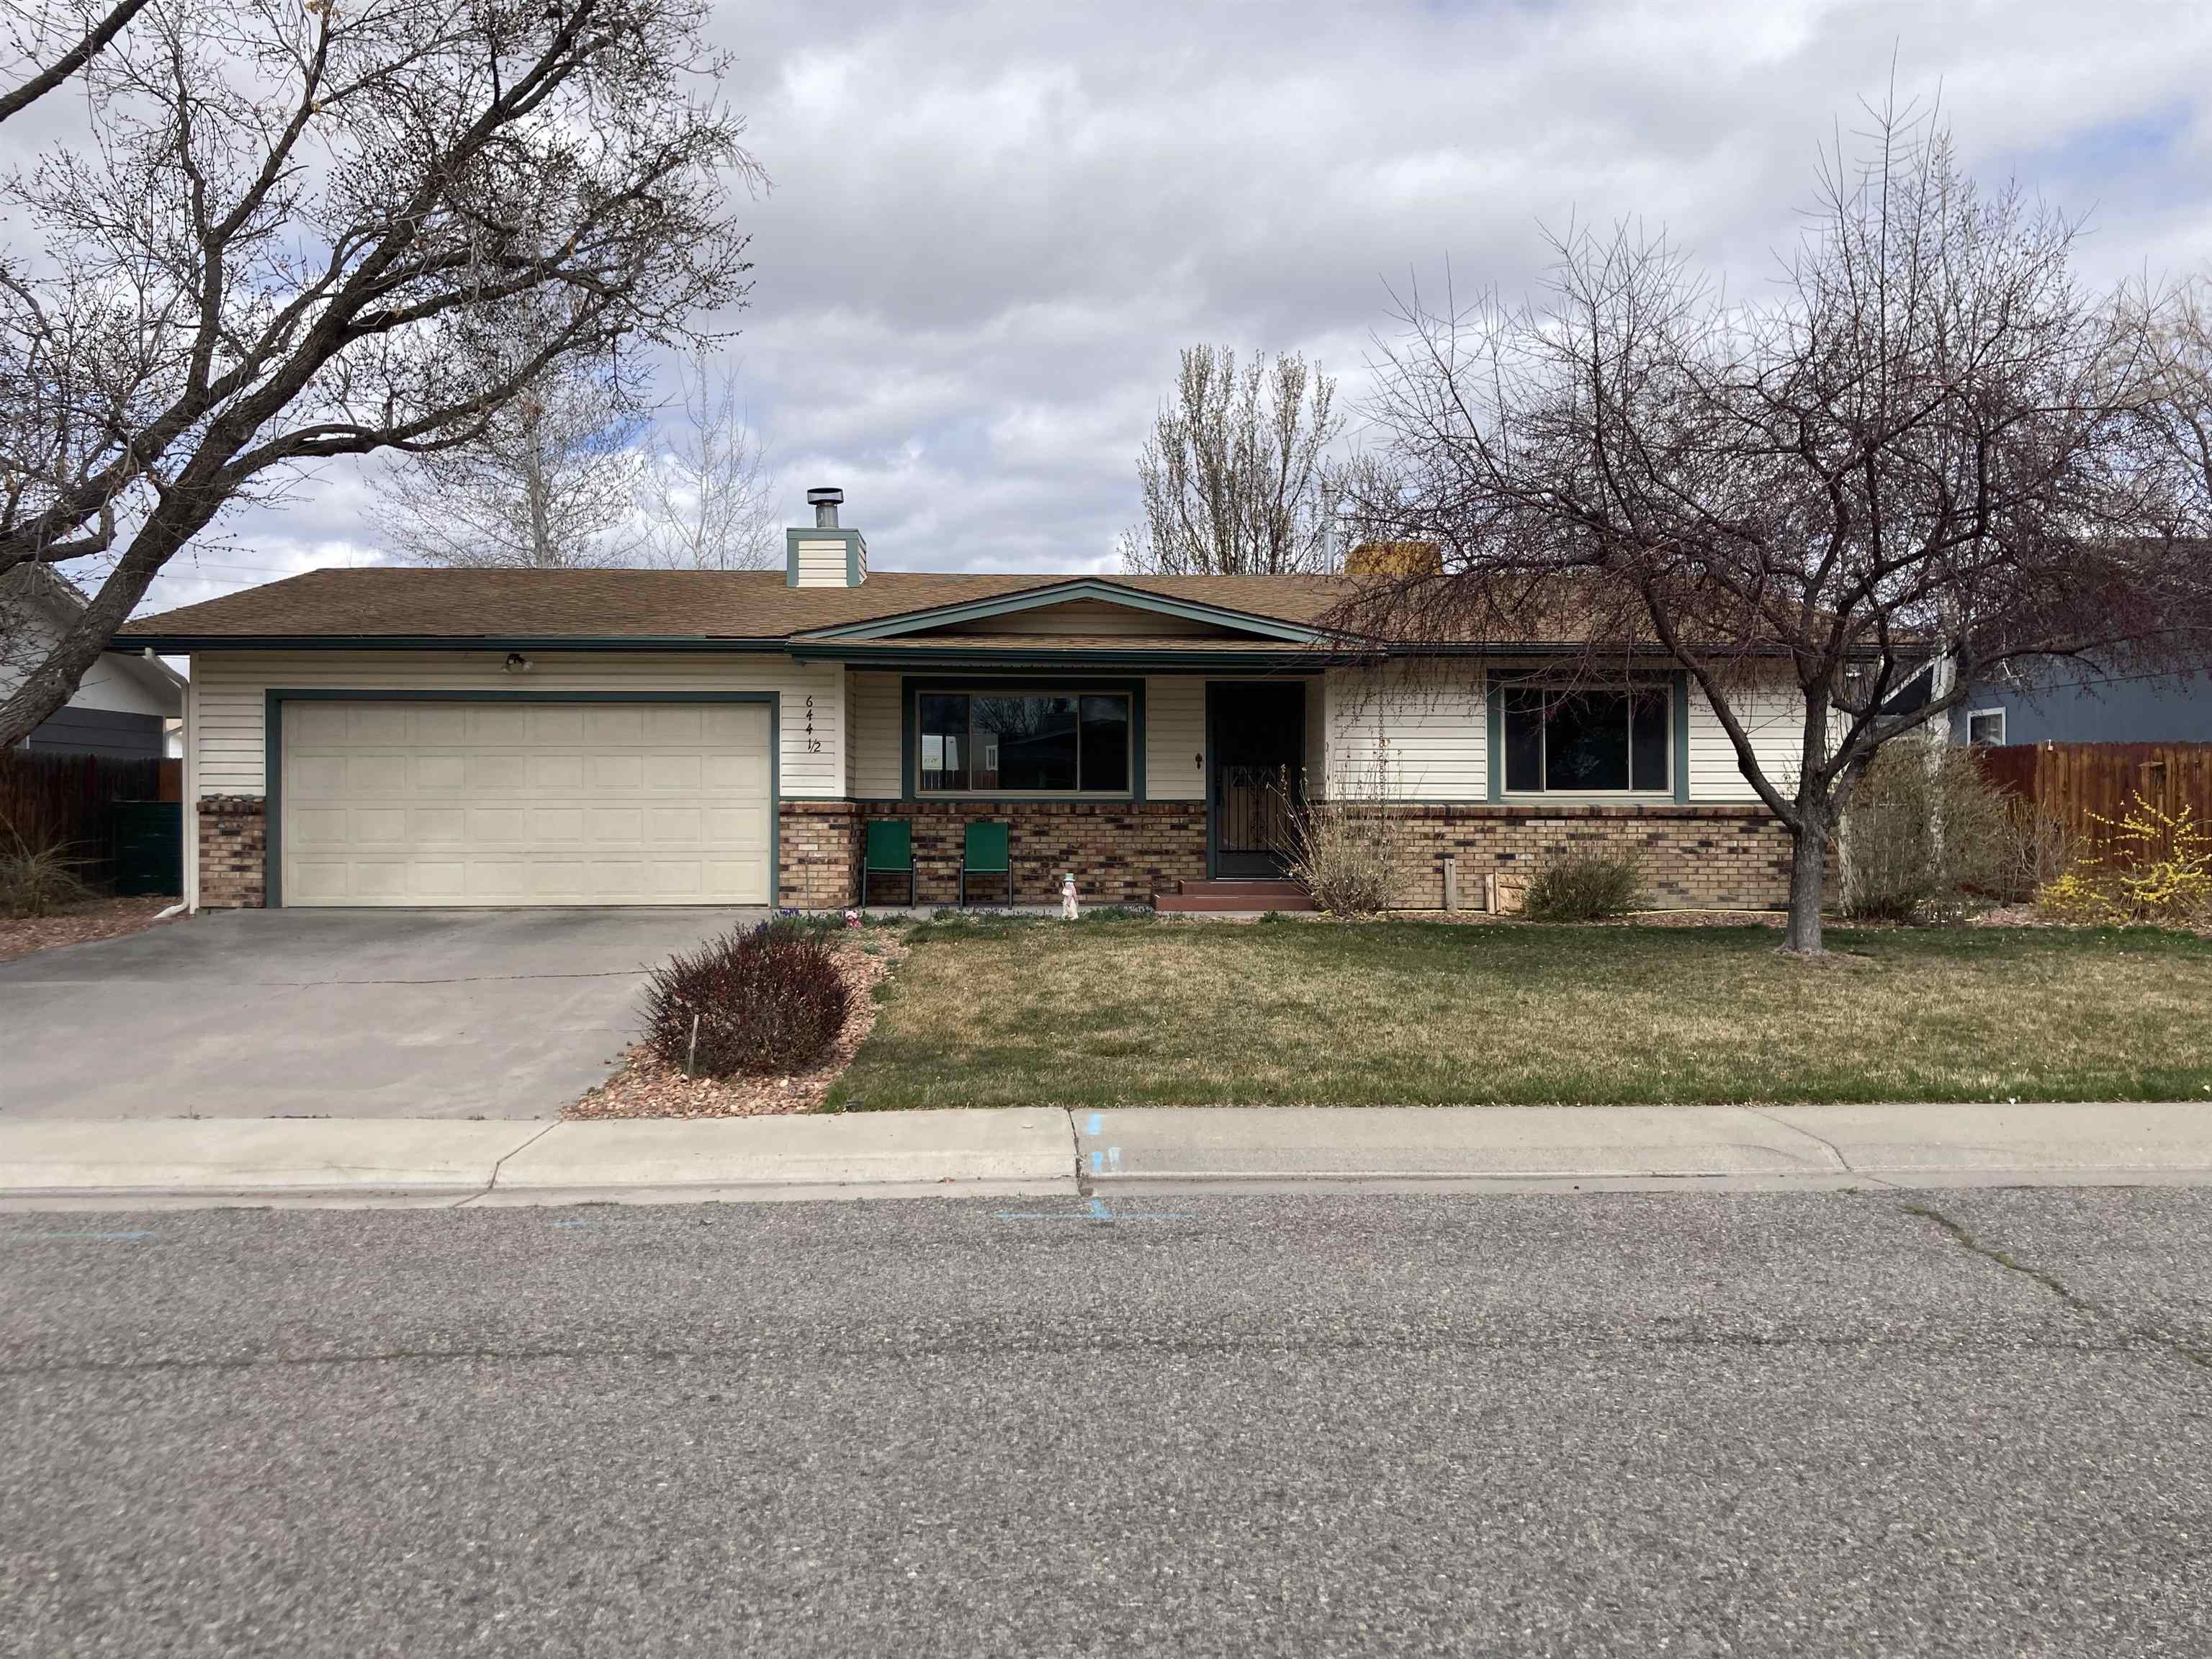 Move in ready 3-2-2 in NE Grand Junction with NO HOA.  This home needs updates - make it your own!!  There is RV parking potential in the backyard.  Priced to sell.... come see it and make your best offer!